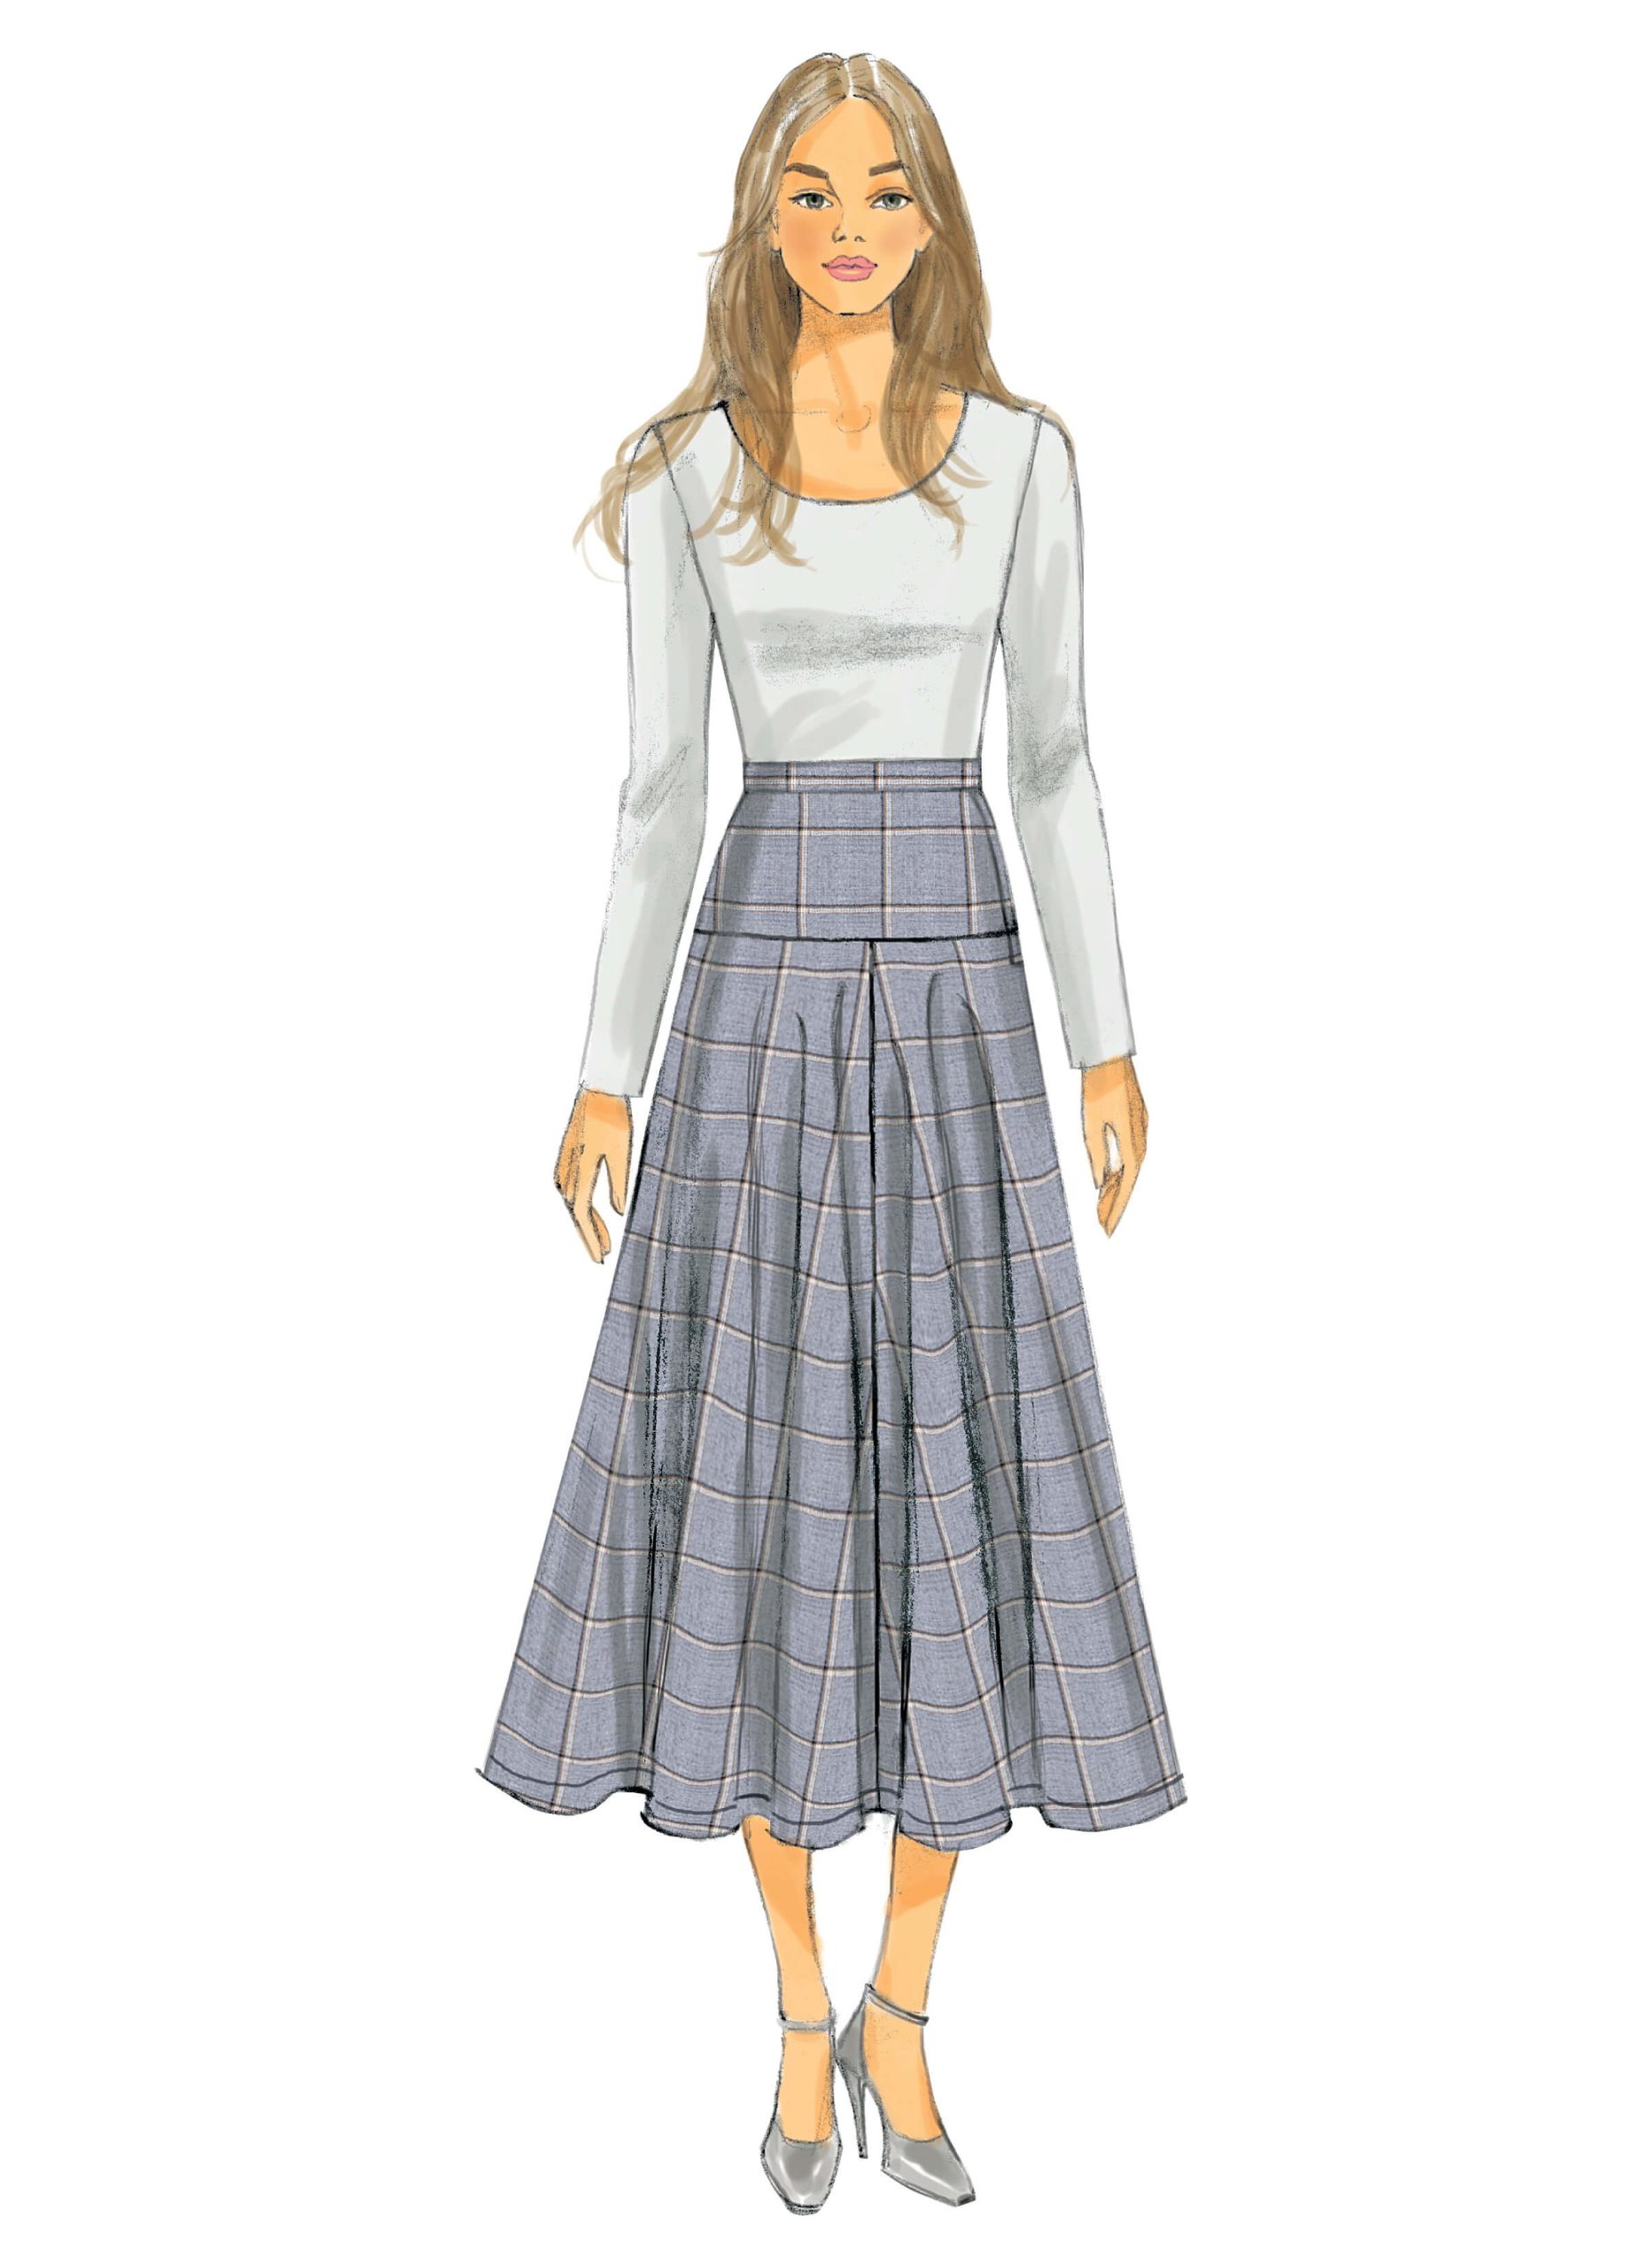 Butterick Sewing Pattern B6249 Misses' Skirt